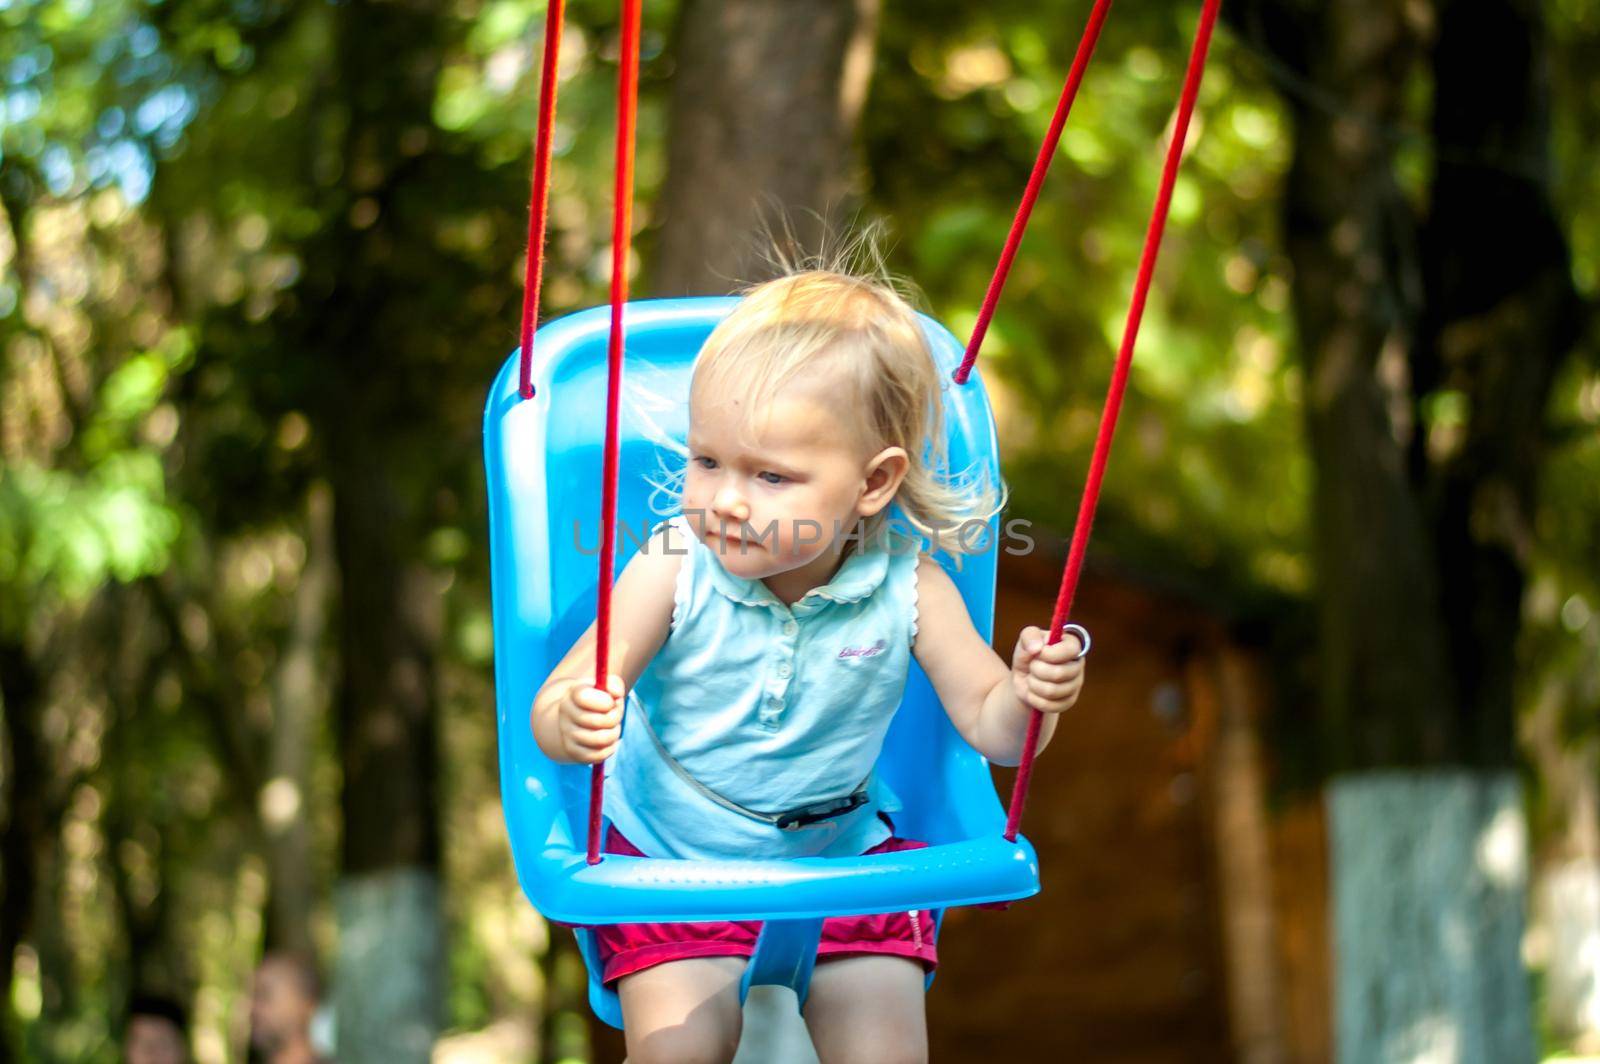 toddler girl on a swing in the park. High quality photo